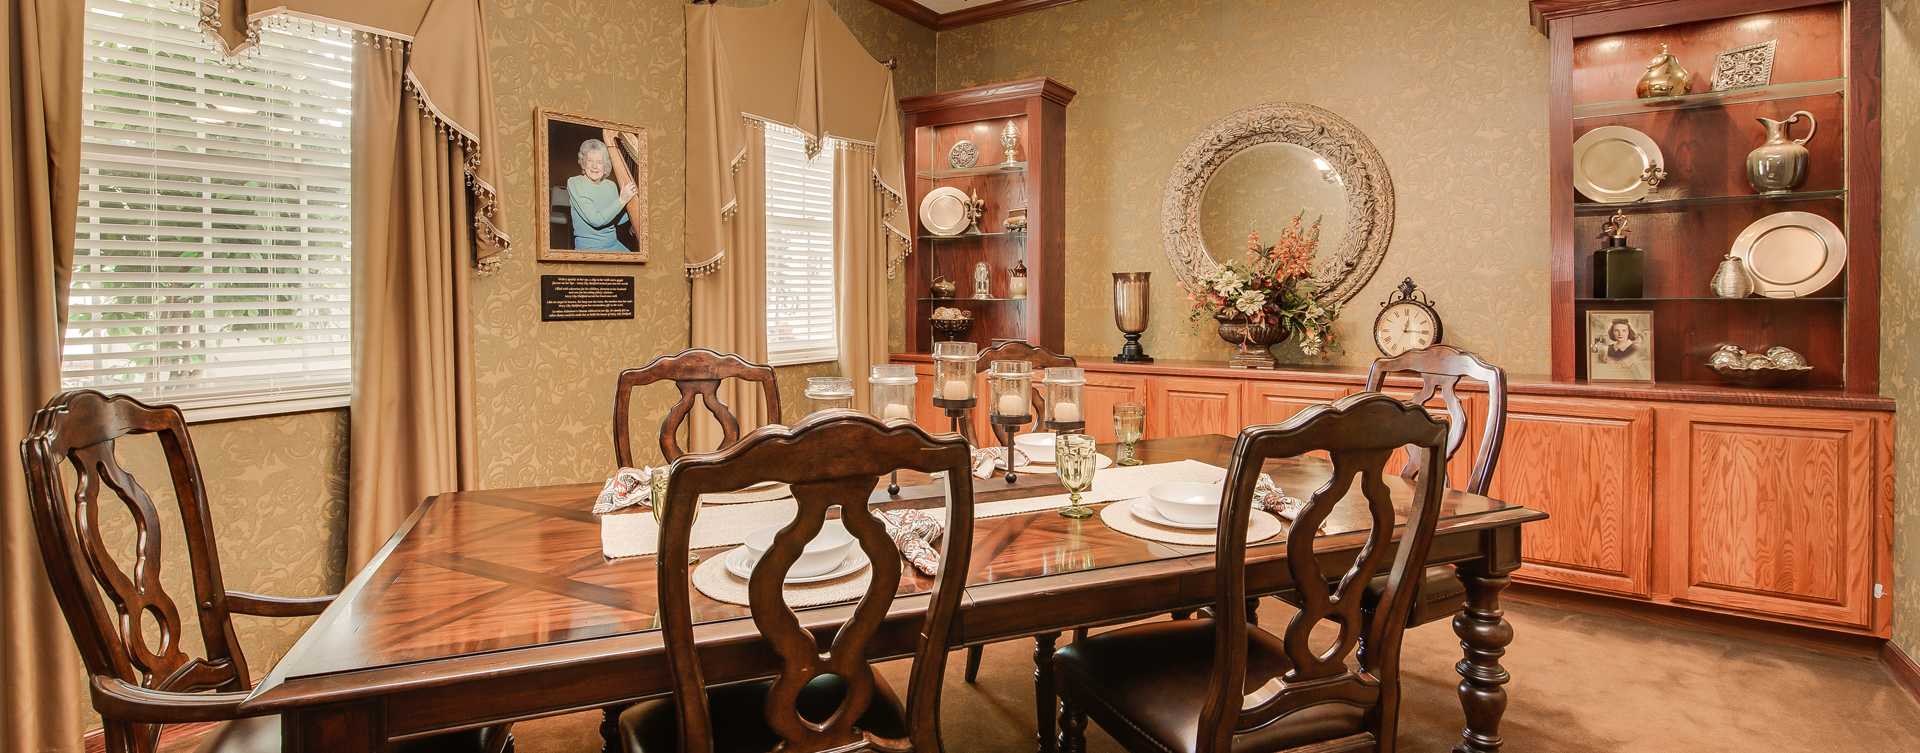 Have fun with themed and holiday meals in the private dining room at Bickford of Portage